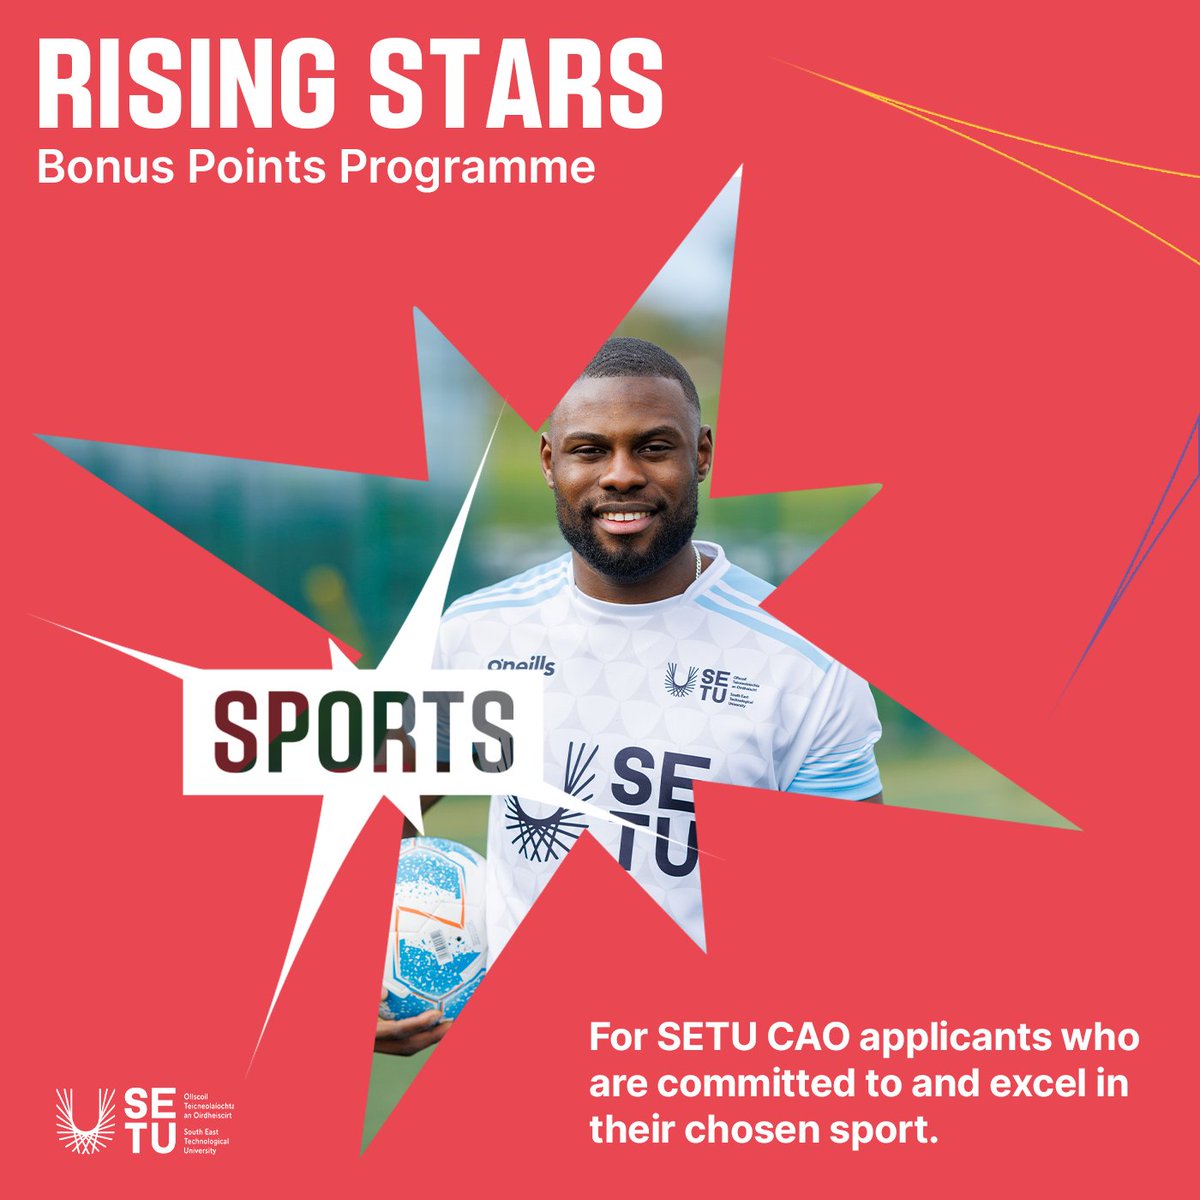 Rising Stars ⭐️ Are you a CAO applicant who has completed, or currently completing your Leaving Certificate or QQI FE course? You can apply for additional CAO points under the Rising Stars scheme under the sports category. Apply👇 setu.ie/study/undergra… Closing date: May 1st